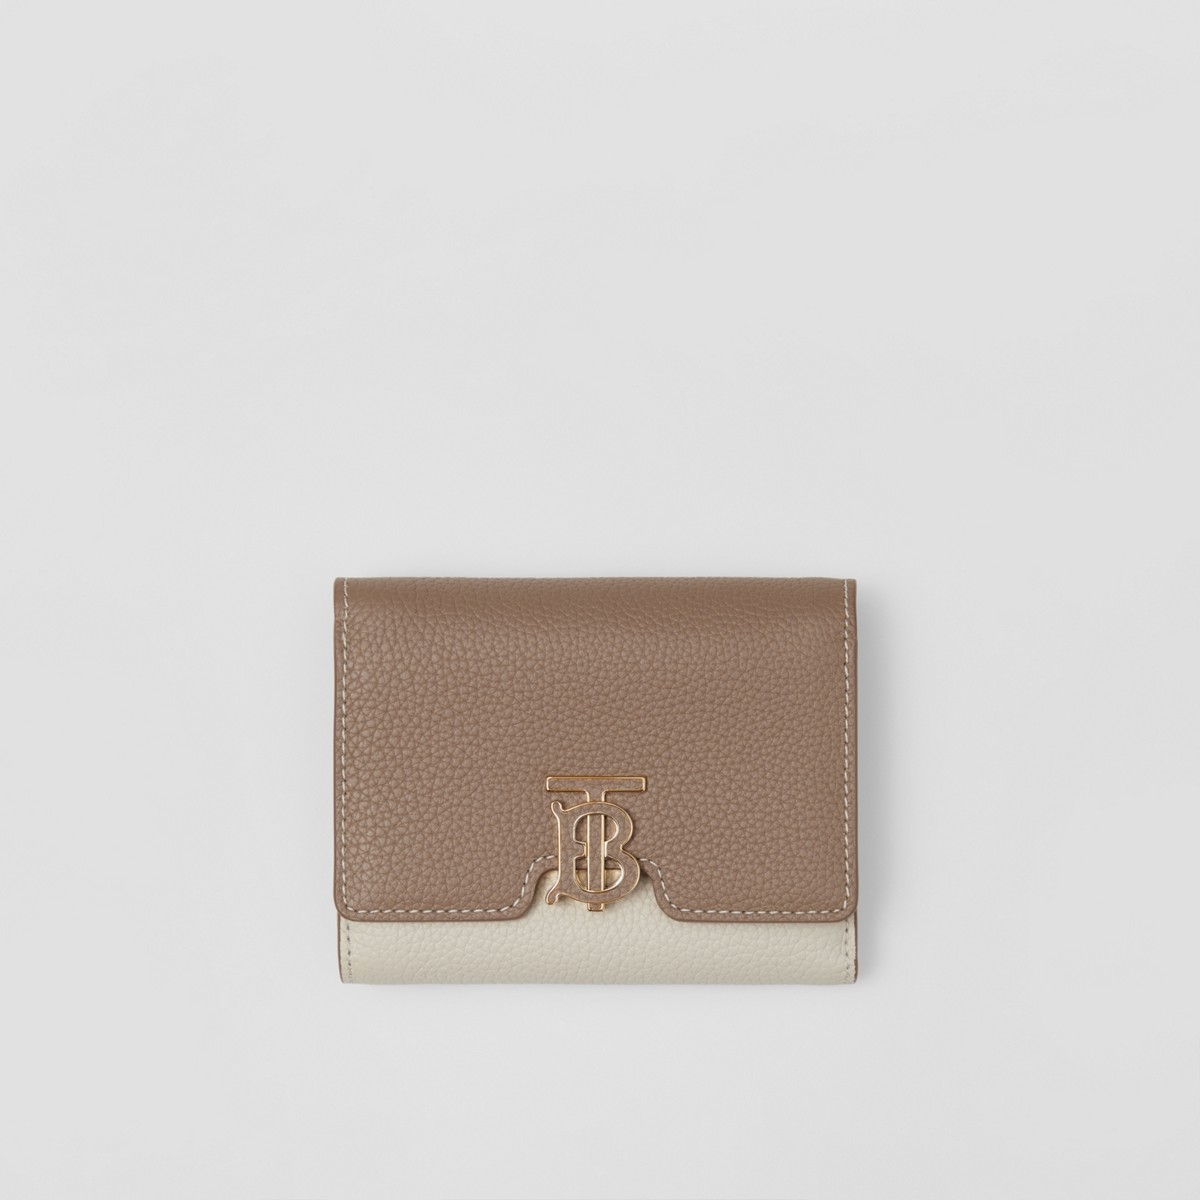 Burberry Tb Trifold Leather Wallet In Camel/archive Beige/warm Tan